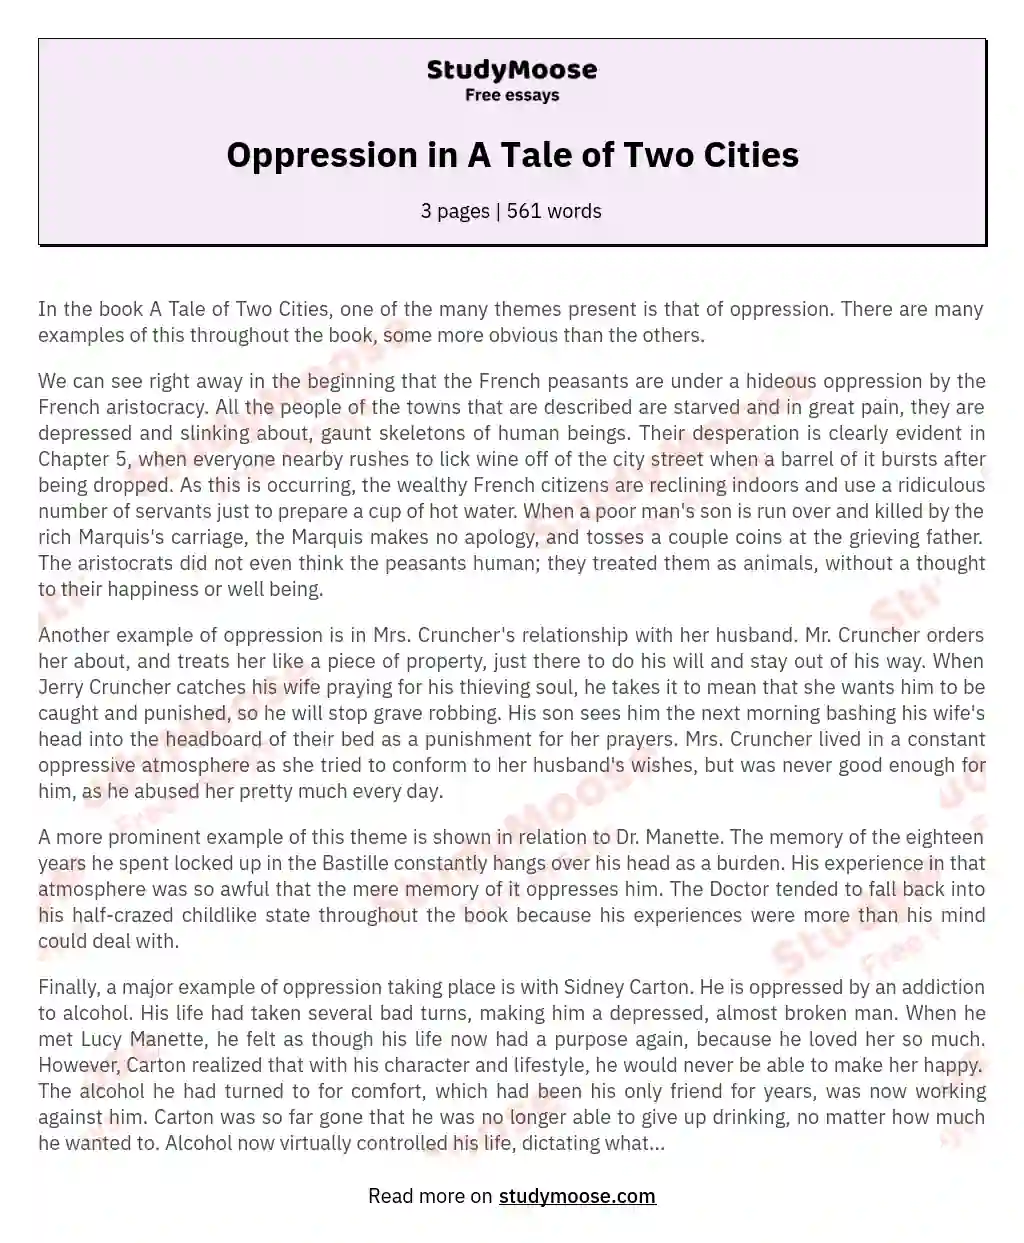 Oppression in A Tale of Two Cities essay